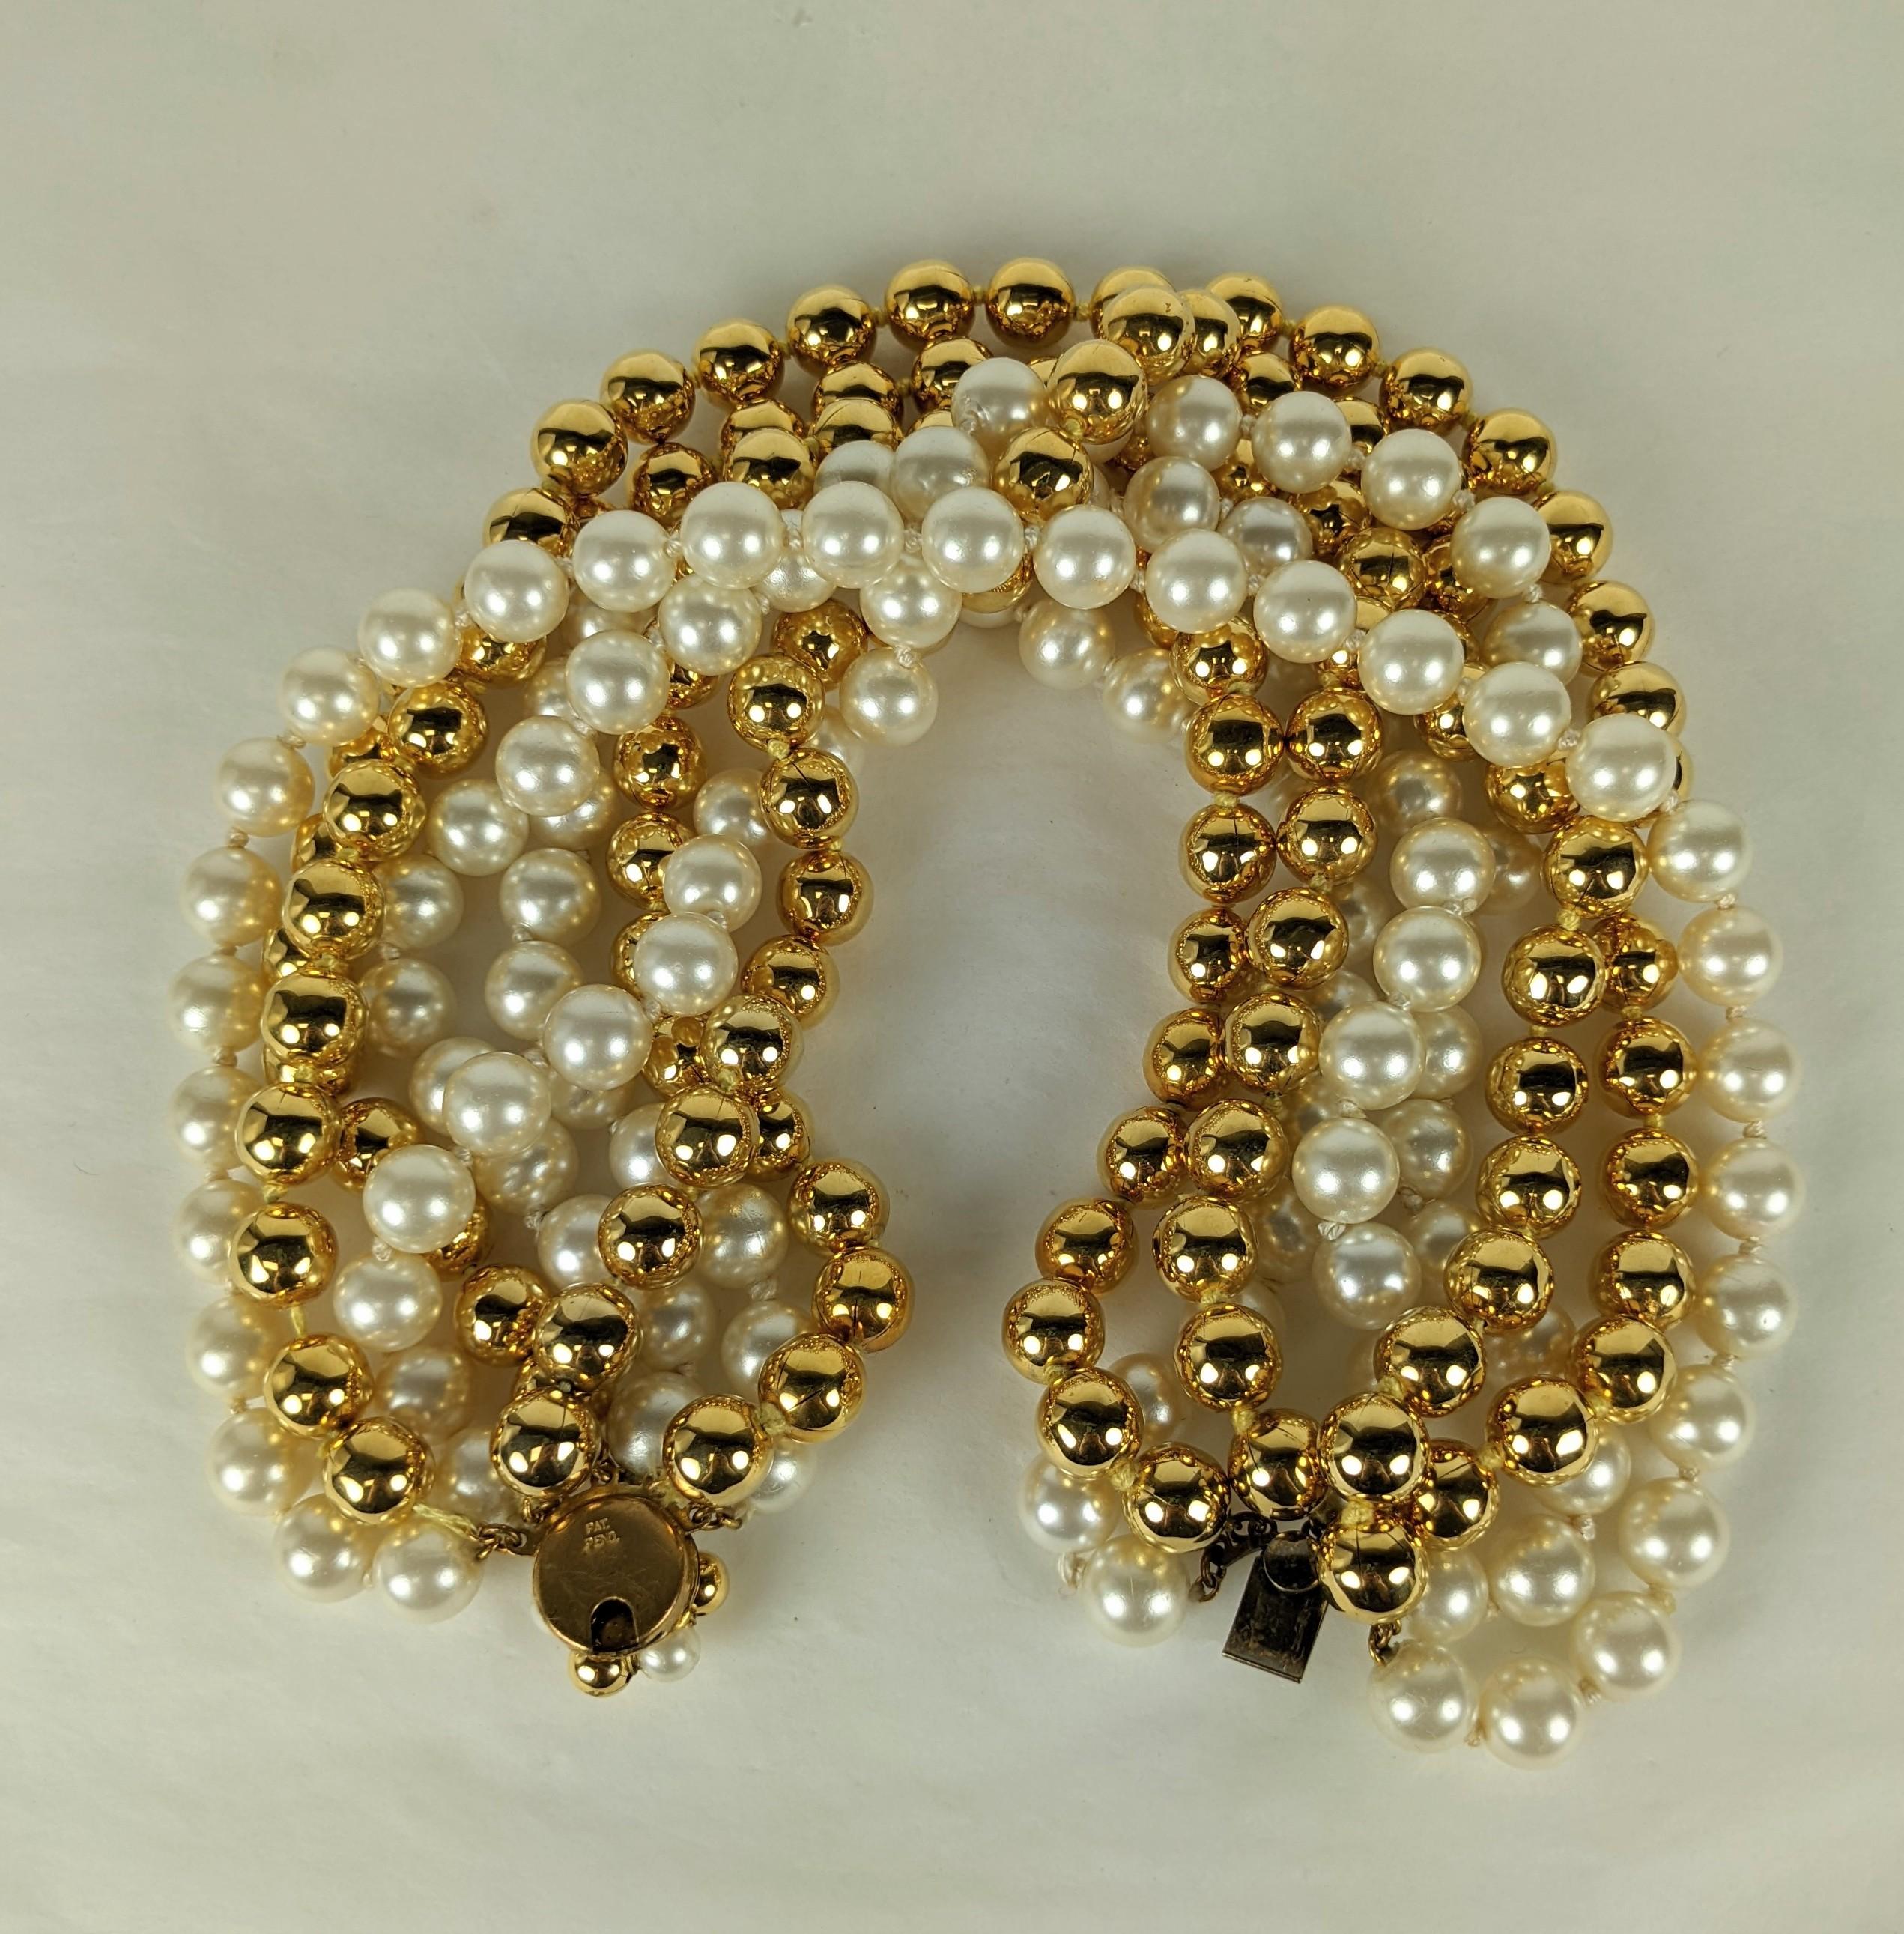  Givenchy Haute Couture Torsade Necklace, Provenance Bunny Mellon In Excellent Condition For Sale In New York, NY